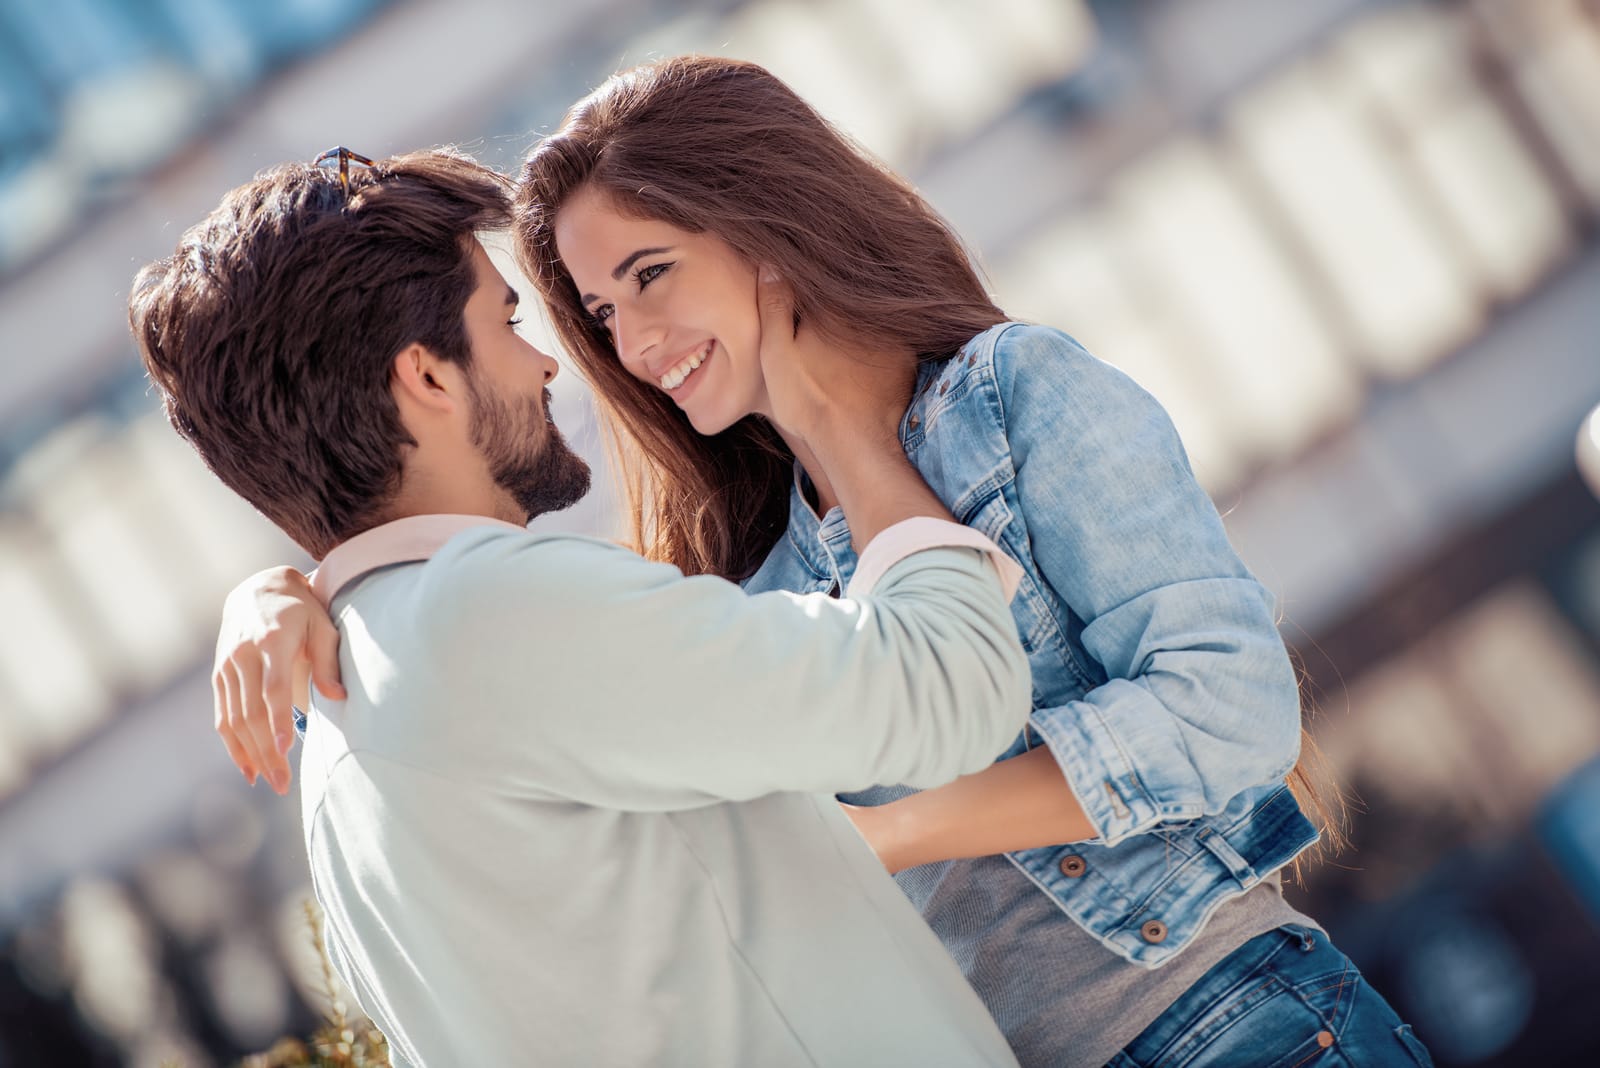 These 5 Zodiac Signs Will Be Happy In Love In 2022